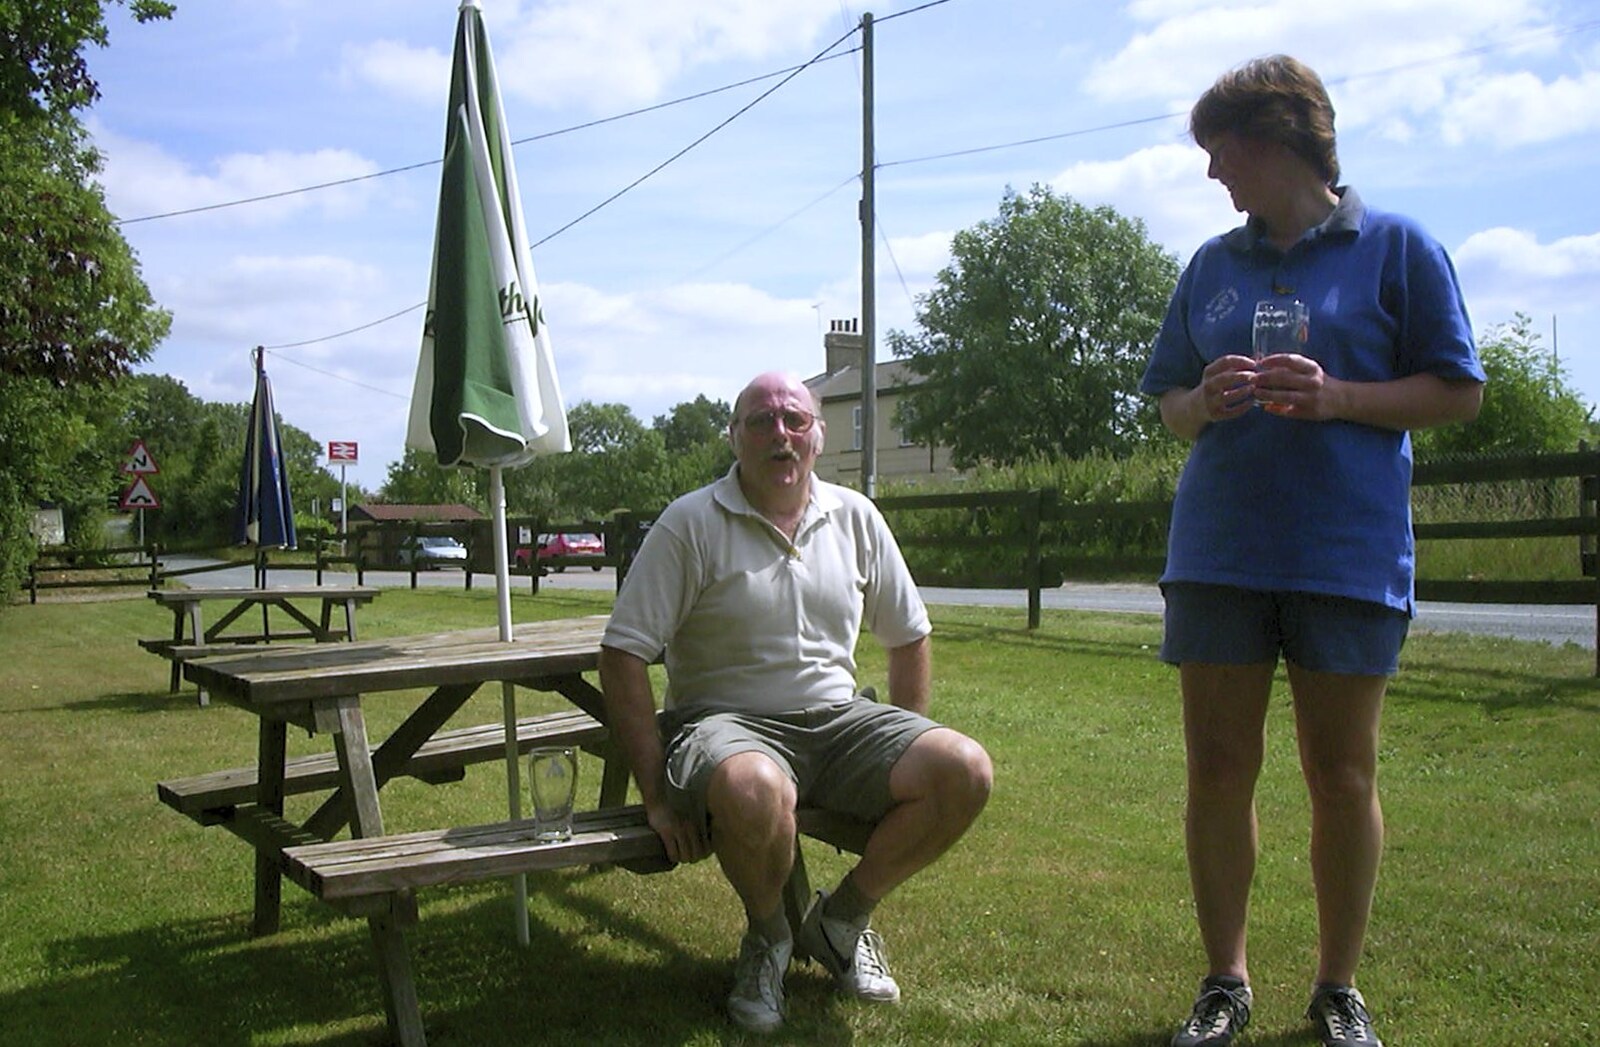 The BSCC Annual Bike Ride, Orford, Suffolk - 12th July 2003: Bindery Dave has a bit of a sit down